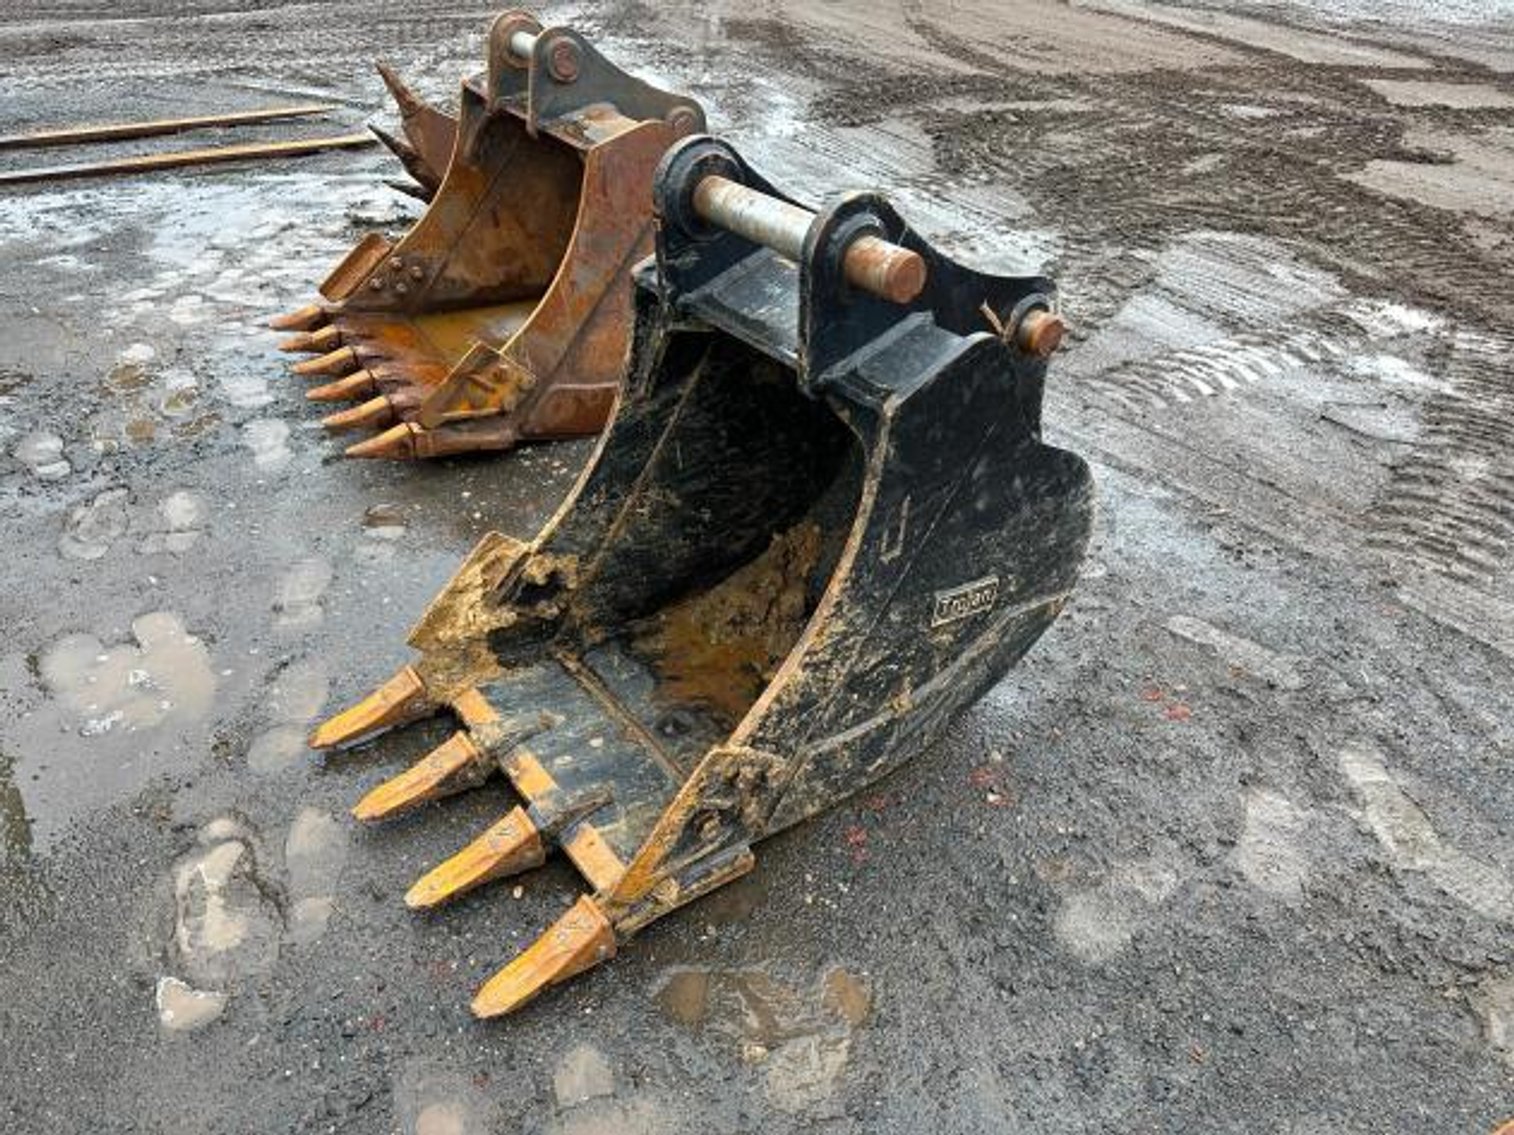 Excavator Contractor Surplus to Ongoing Operations